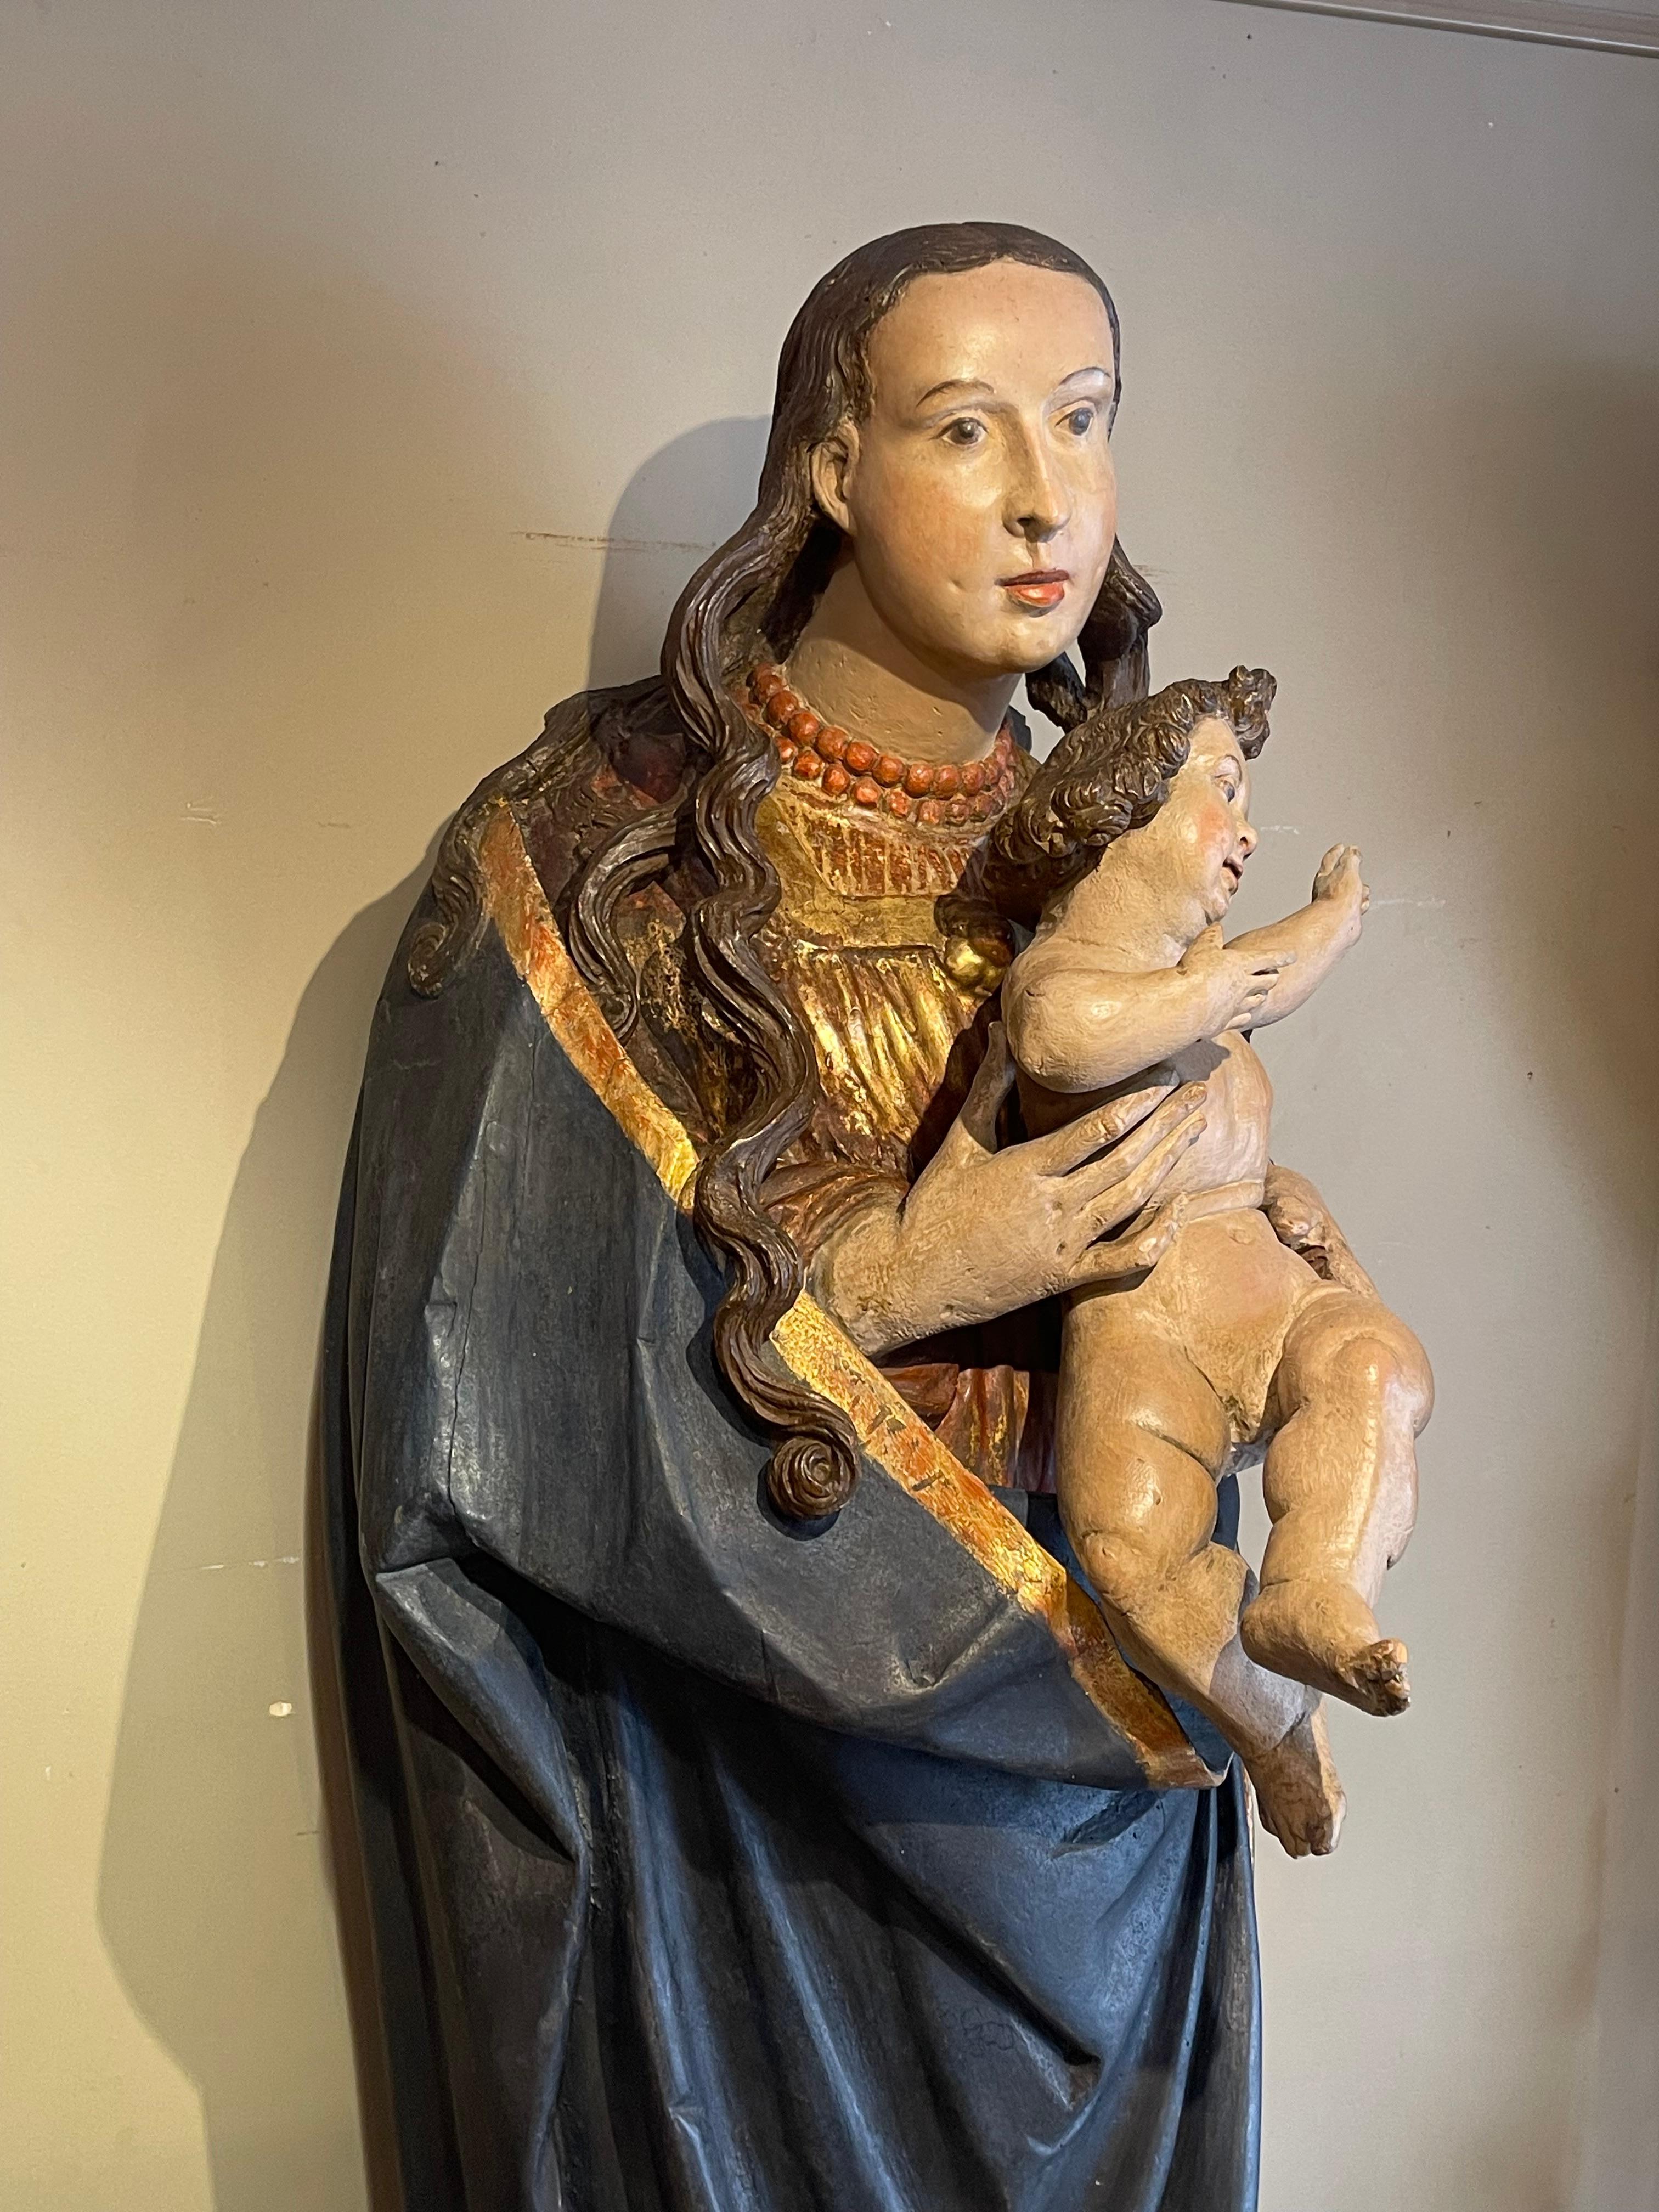 Large wooden Madonna and Child, painted and carved in hollow at the back.
The theme of the Virgin and Child is the most represented in all Christian art, whereas the infancy of Jesus is almost completely avoided by the canonical evangelists. This